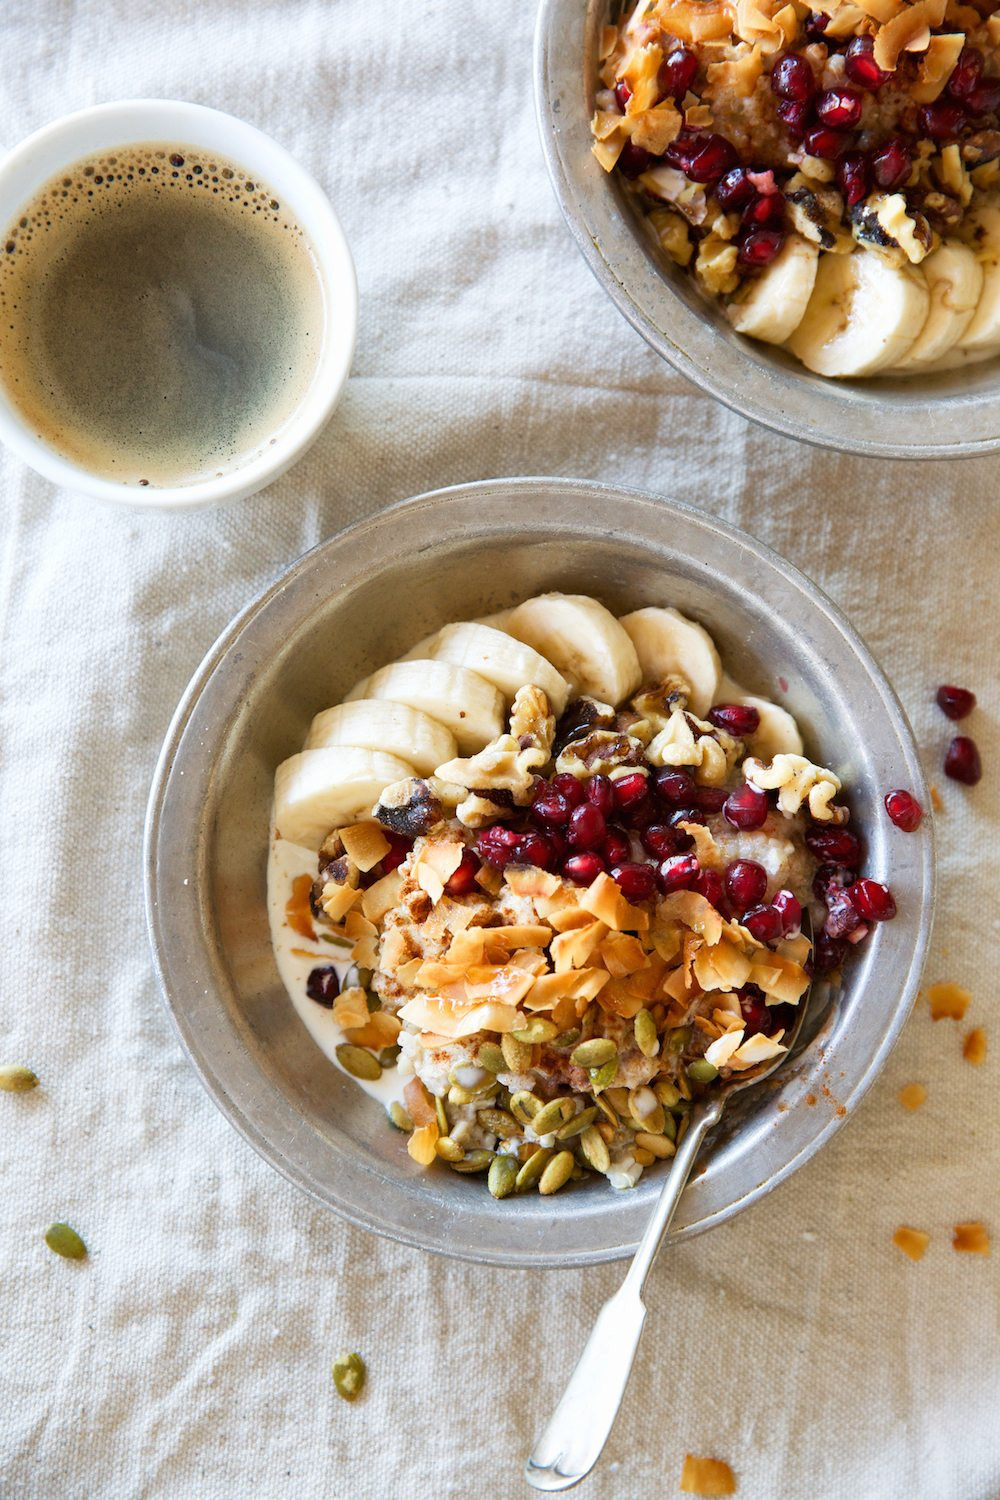 Healthy Oatmeal Ideas For Breakfast
 12 Healthy Breakfast Recipes to Shake Up Your Morning